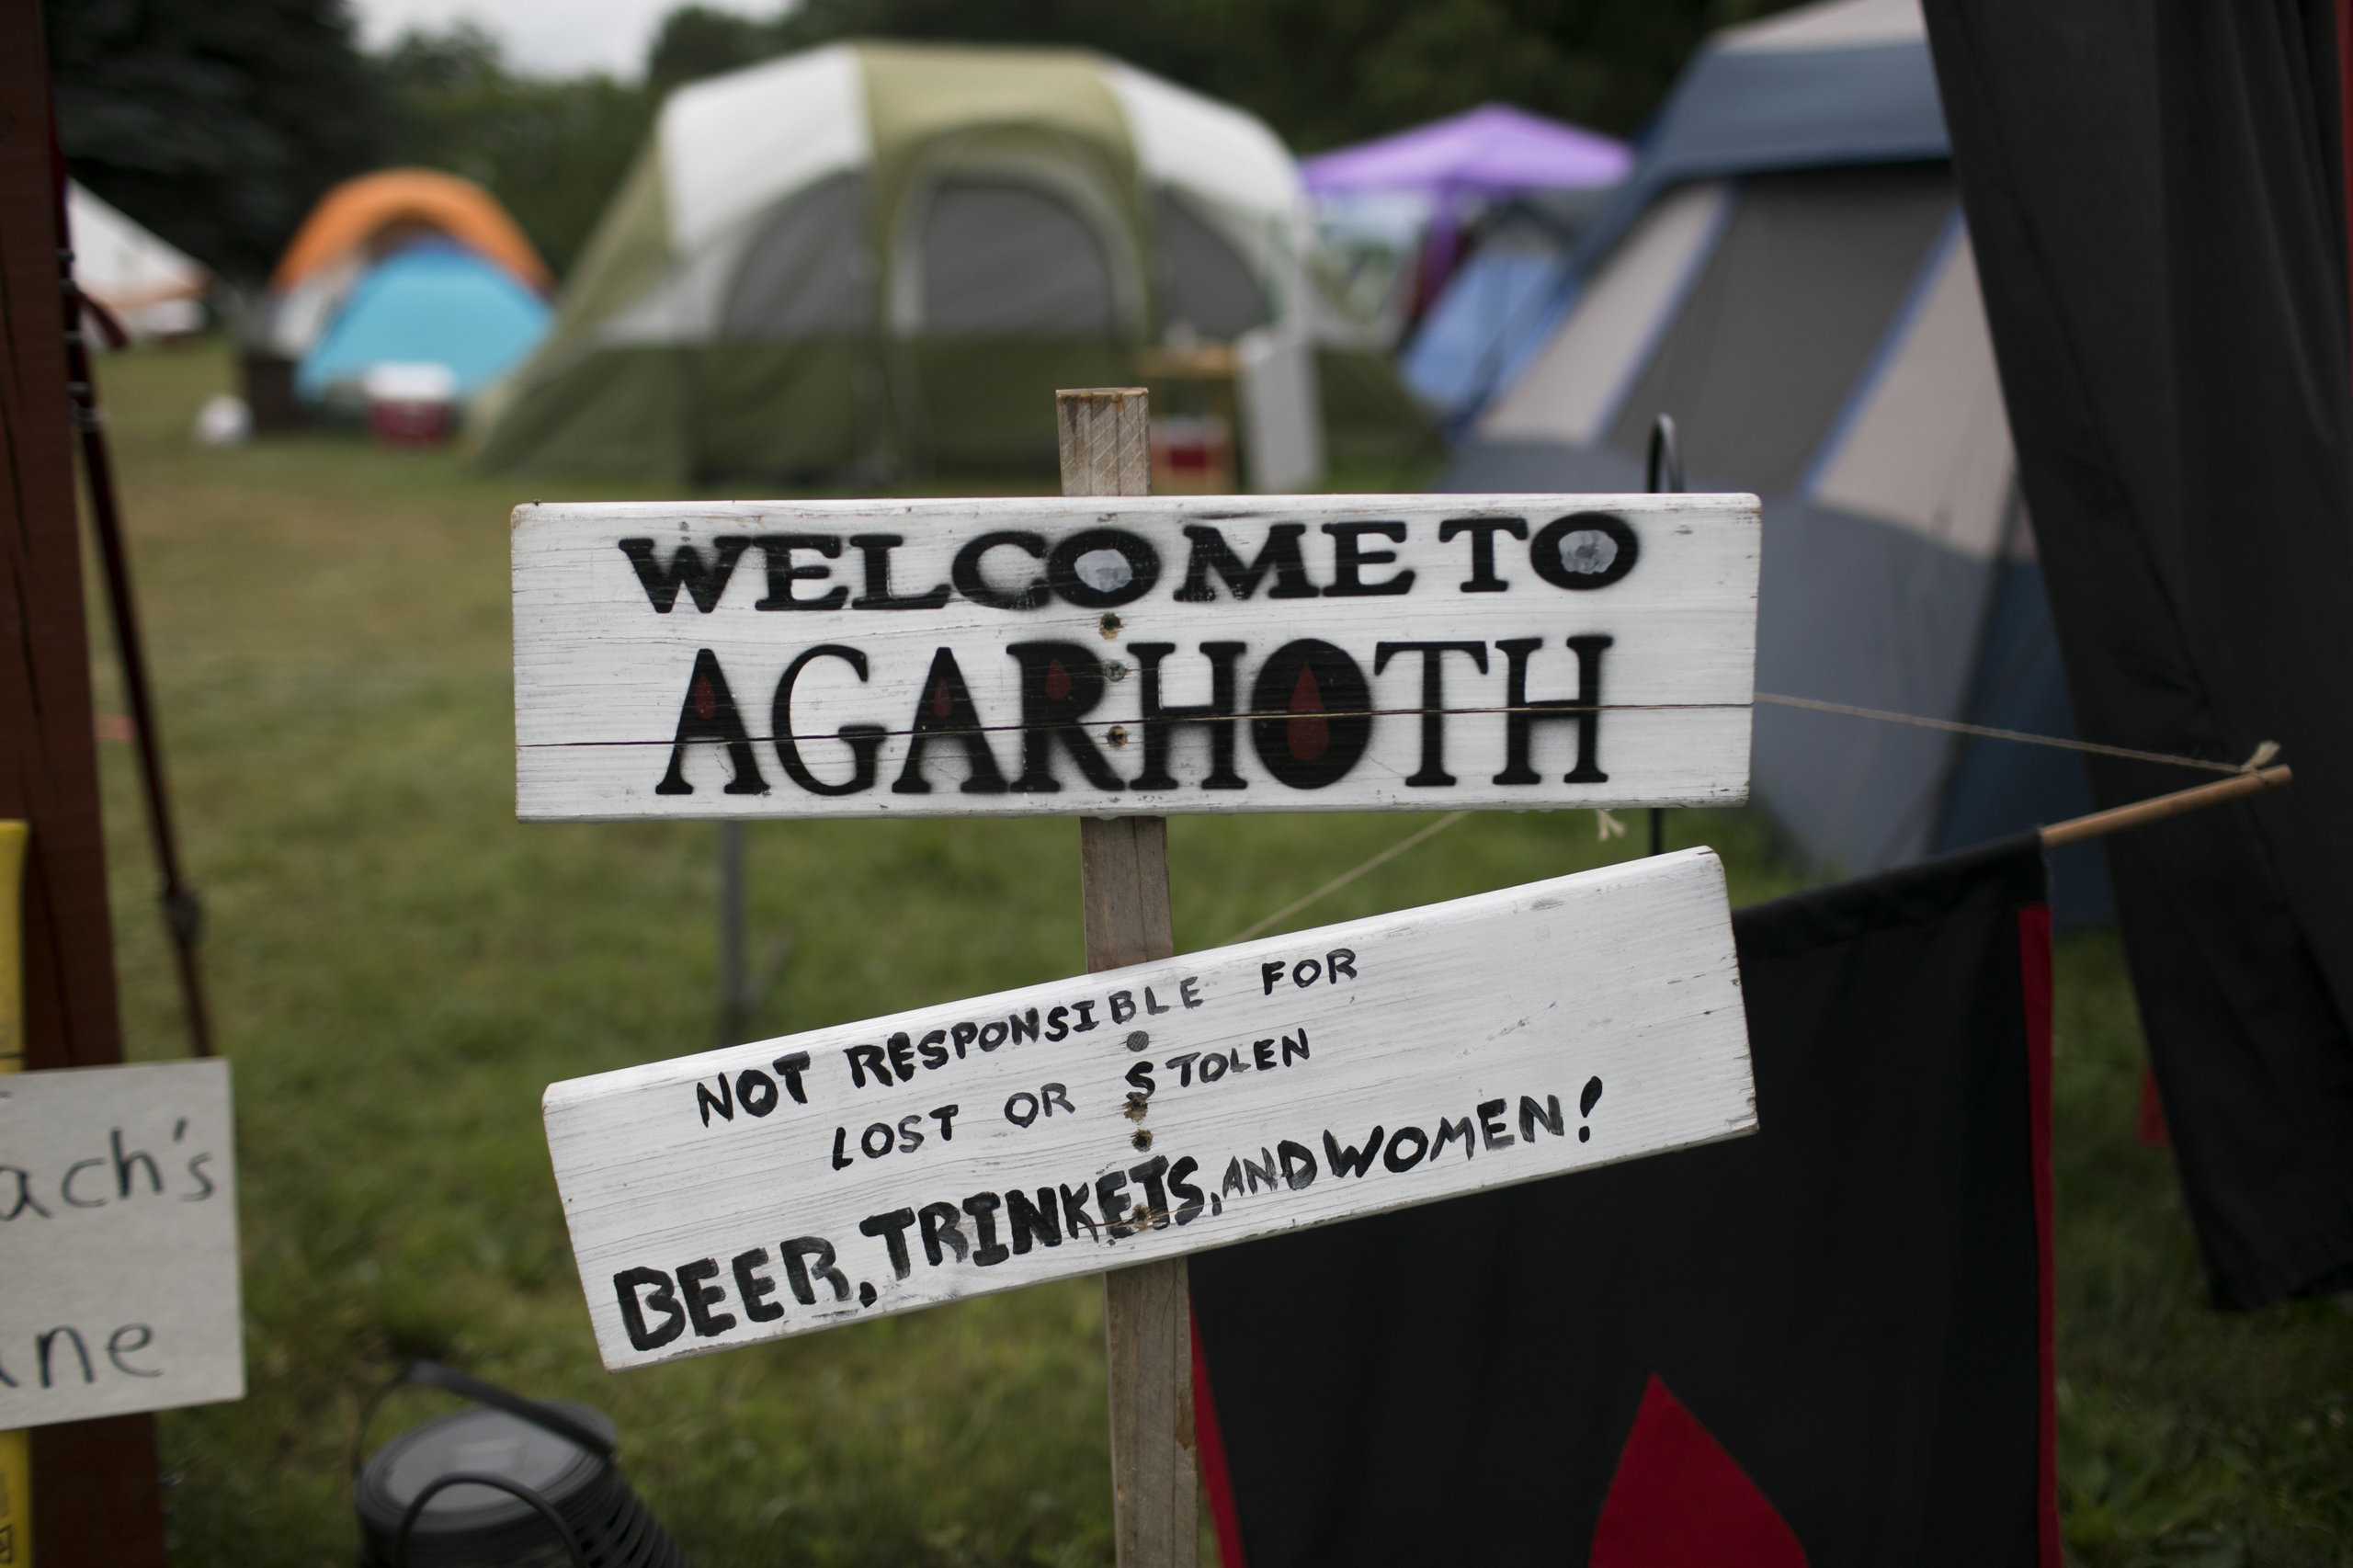 A "Welcome to Agarhoth" sign at a camp entrance.